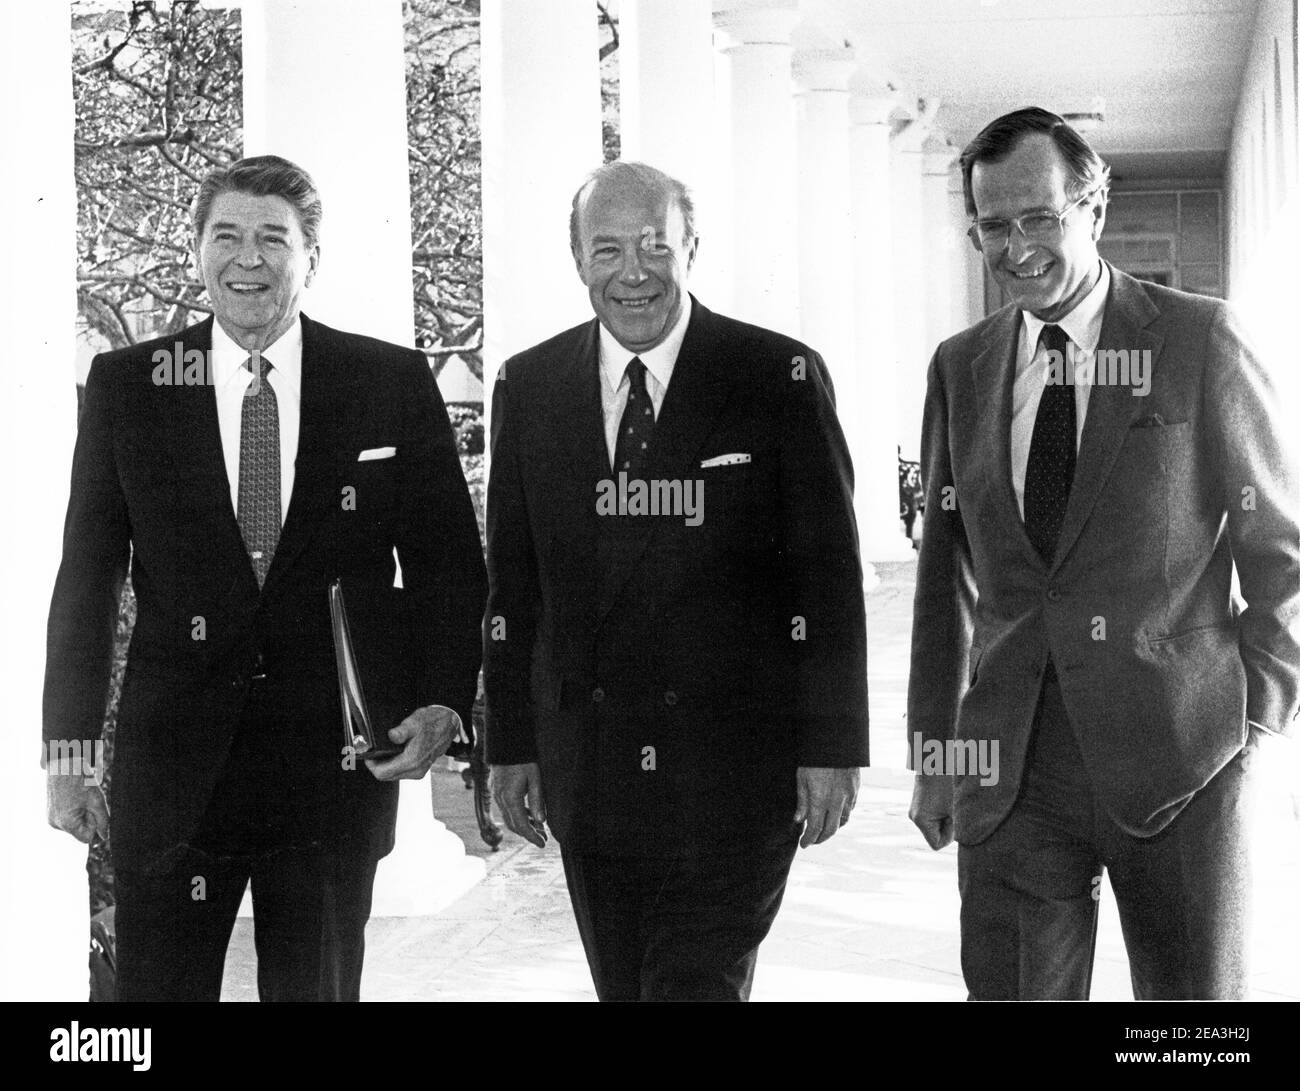 **File Photo** George Shultz Has Passed Away. United States President Ronald Reagan, left, United States Secretary of State George P. Shultz, center, and US Vice President George H.W. Bush, right, walk on the Colonnade from the Oval Office to the Residence of the White House in Washington, DC on January 9, 1985. Shultz is returning to the Capital after his talks with Minister of Foreign Affairs Andrei Gromyko of the USSR in Geneva, Switzerland. Credit: Pool via CNP/MediaPunch Stock Photo